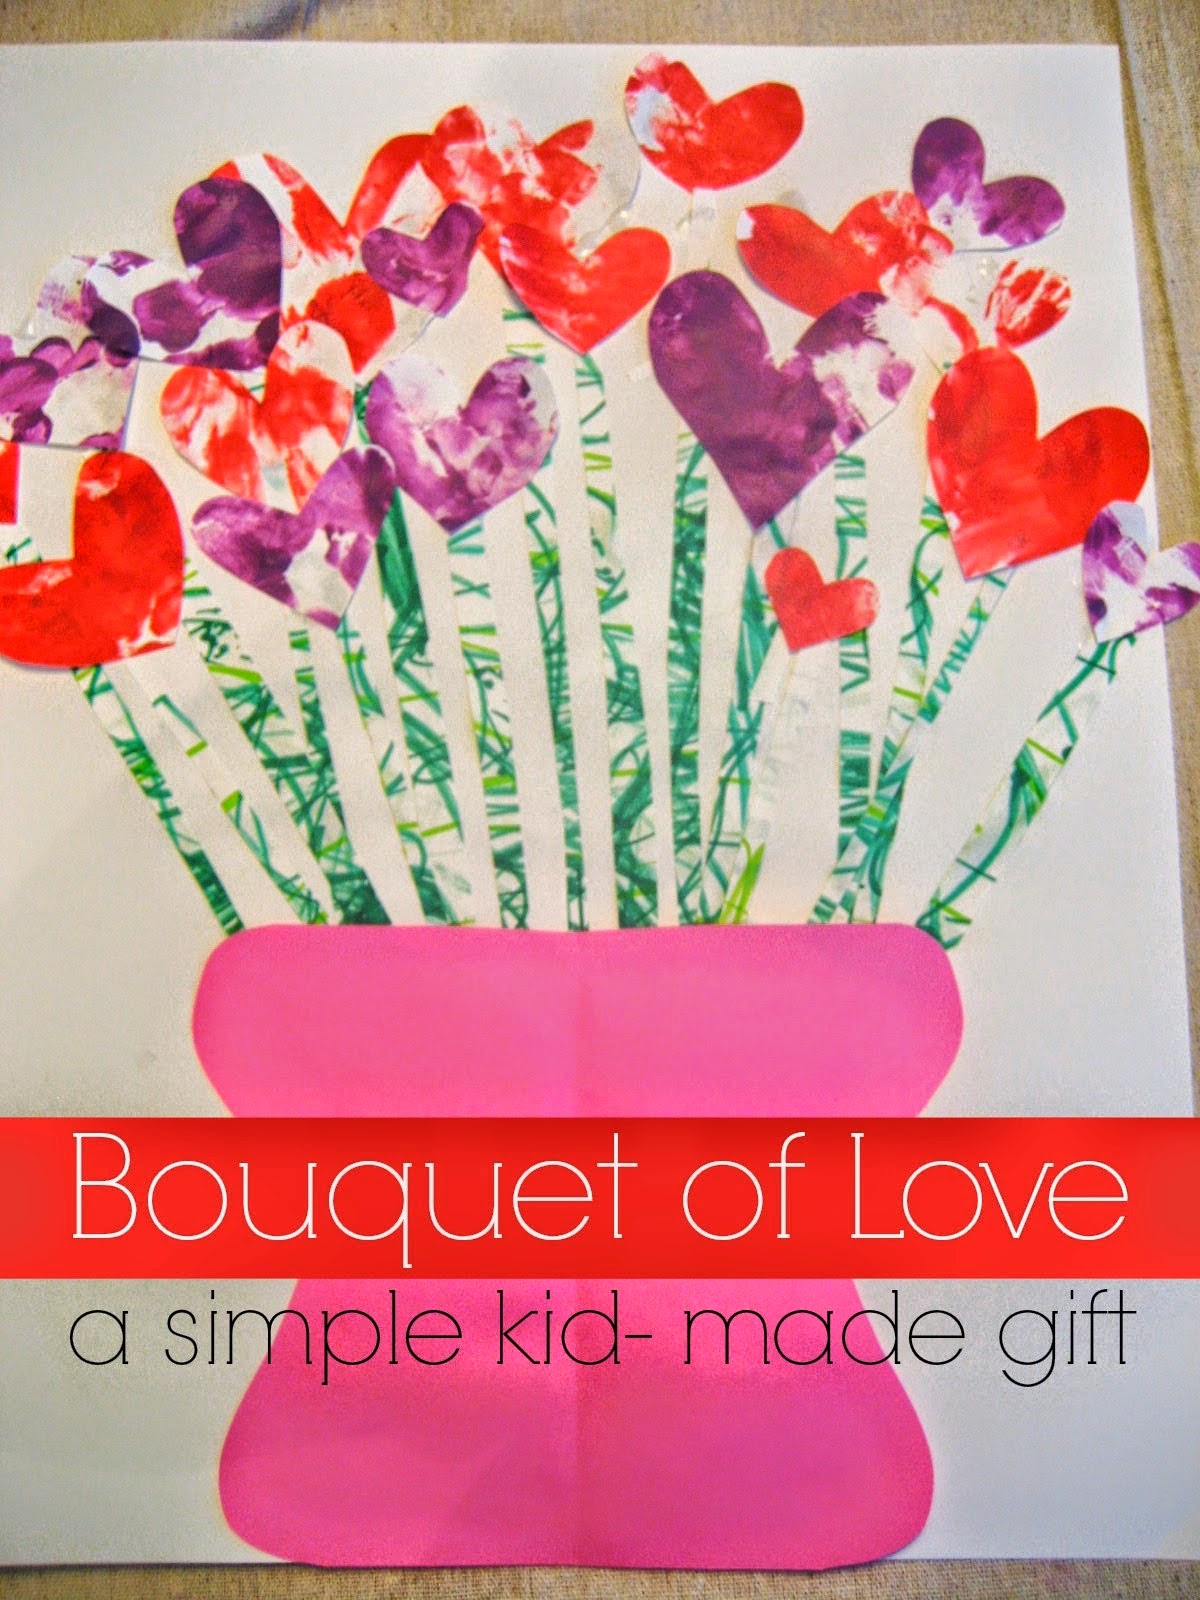 Toddler Approved!: 15 Awesome Heart Crafts and Activities for Kids